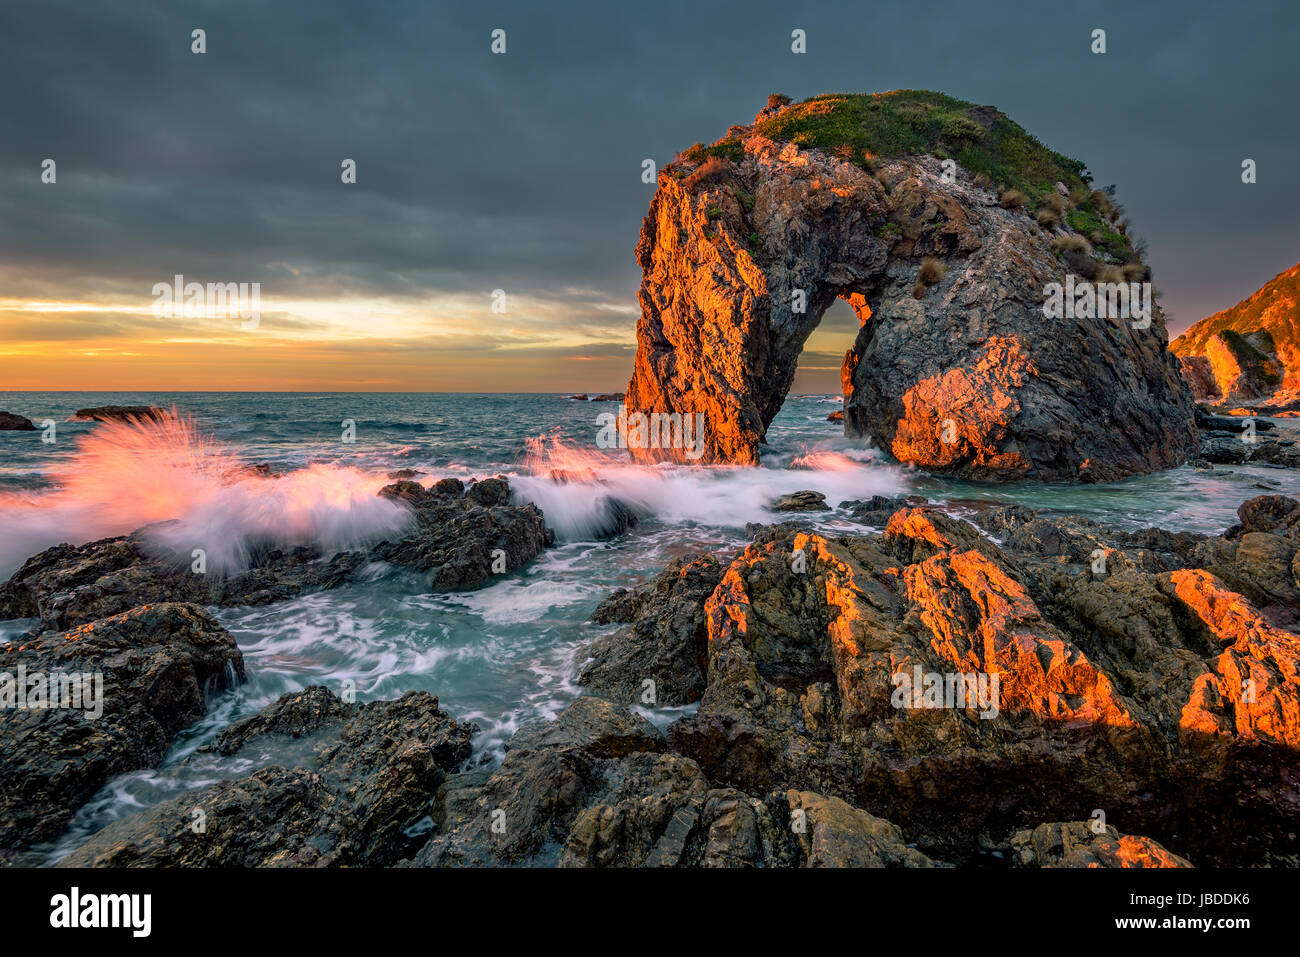 Suntrese at Horse Head Rock on the shore of New South Wales. Stock Photo